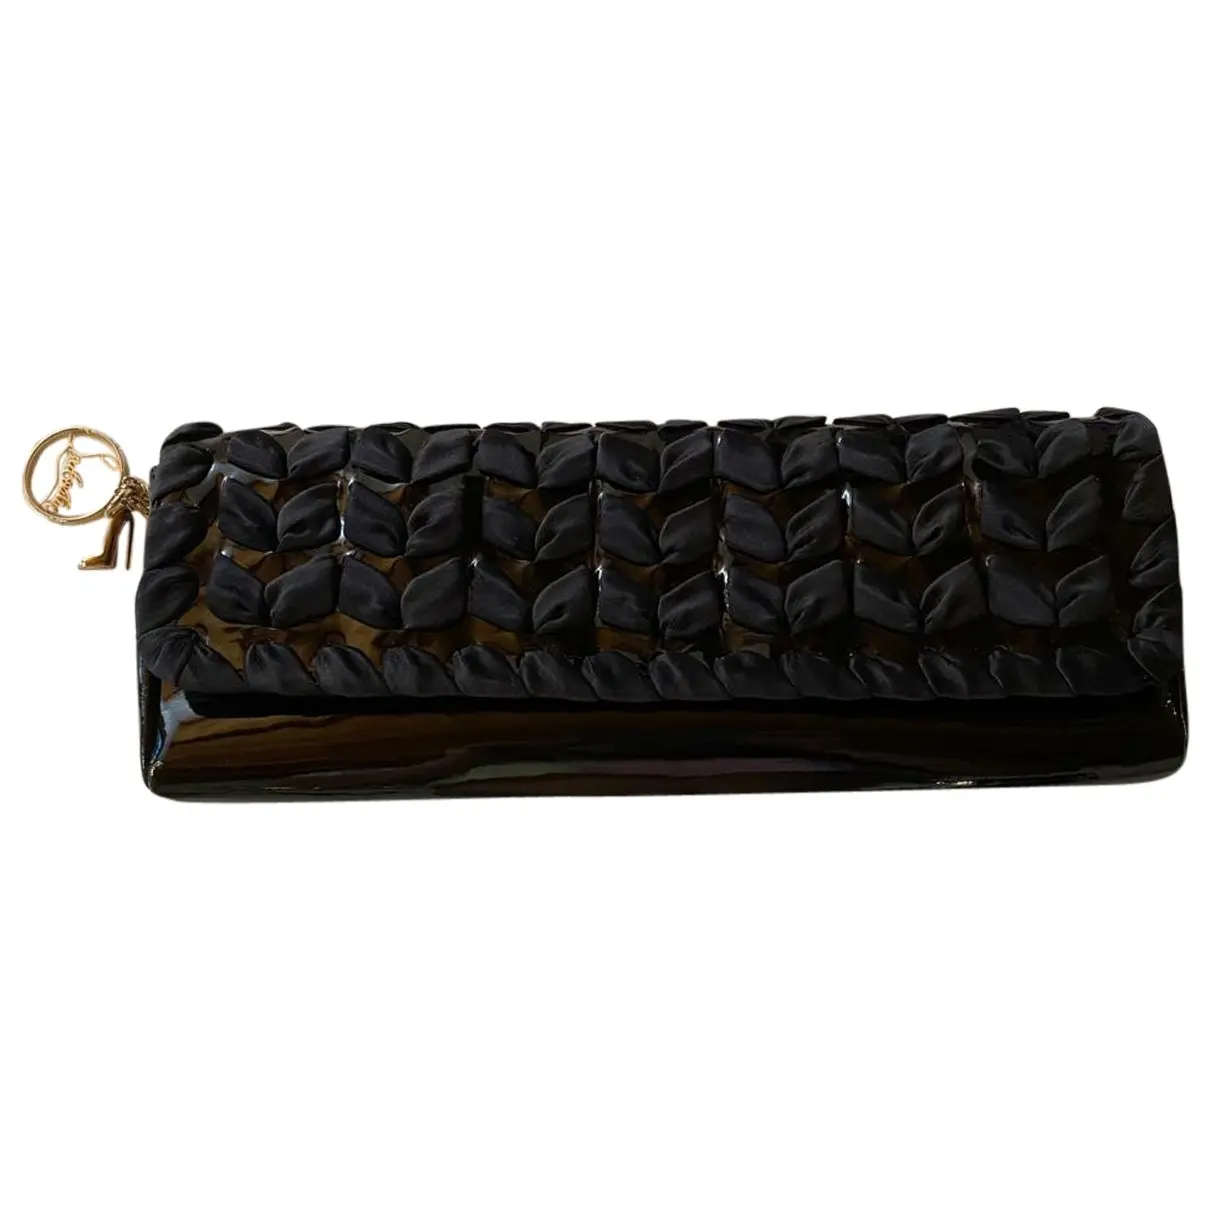 Riviera leather clutch bag Christian Louboutin